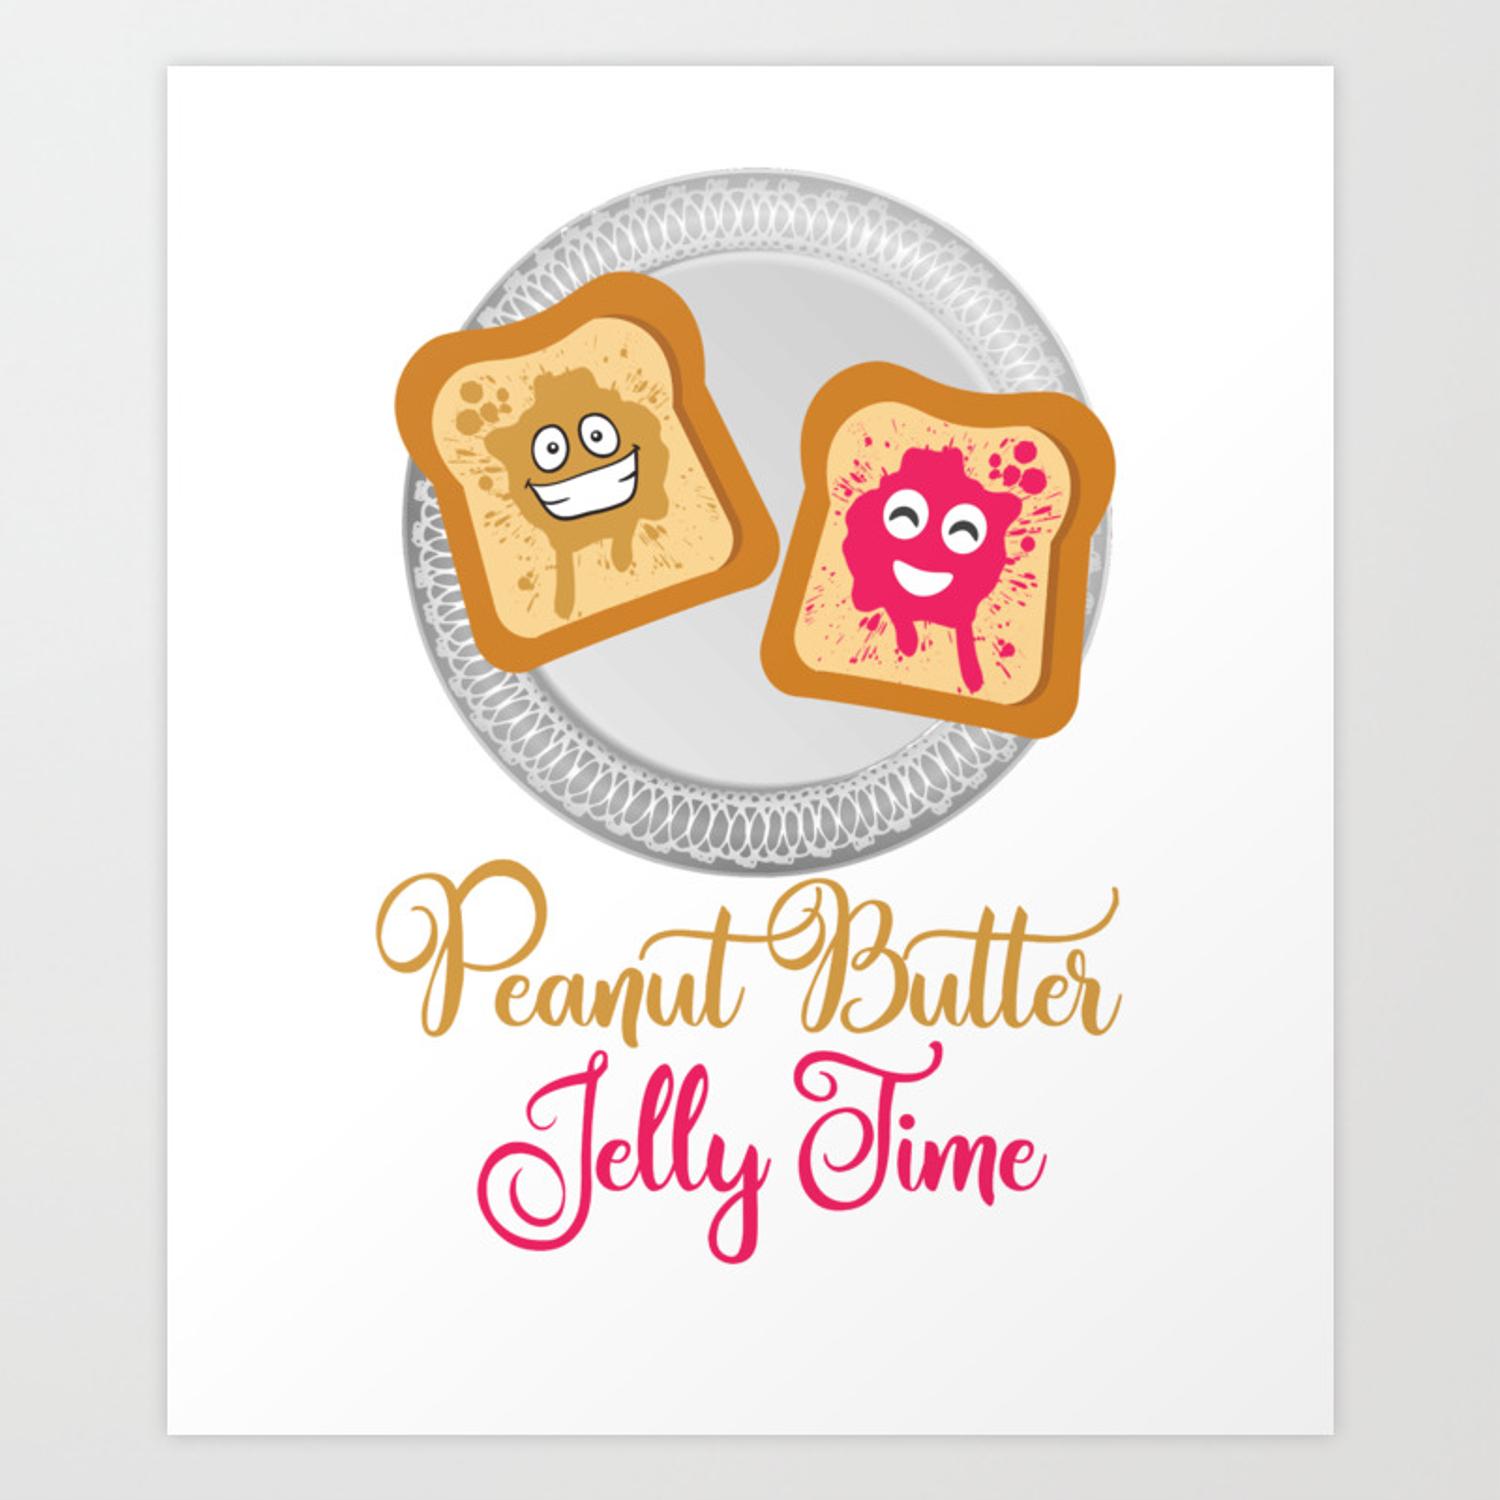 Peanut Butter and Jelly Time Bread Sweet Cute Design Art Print